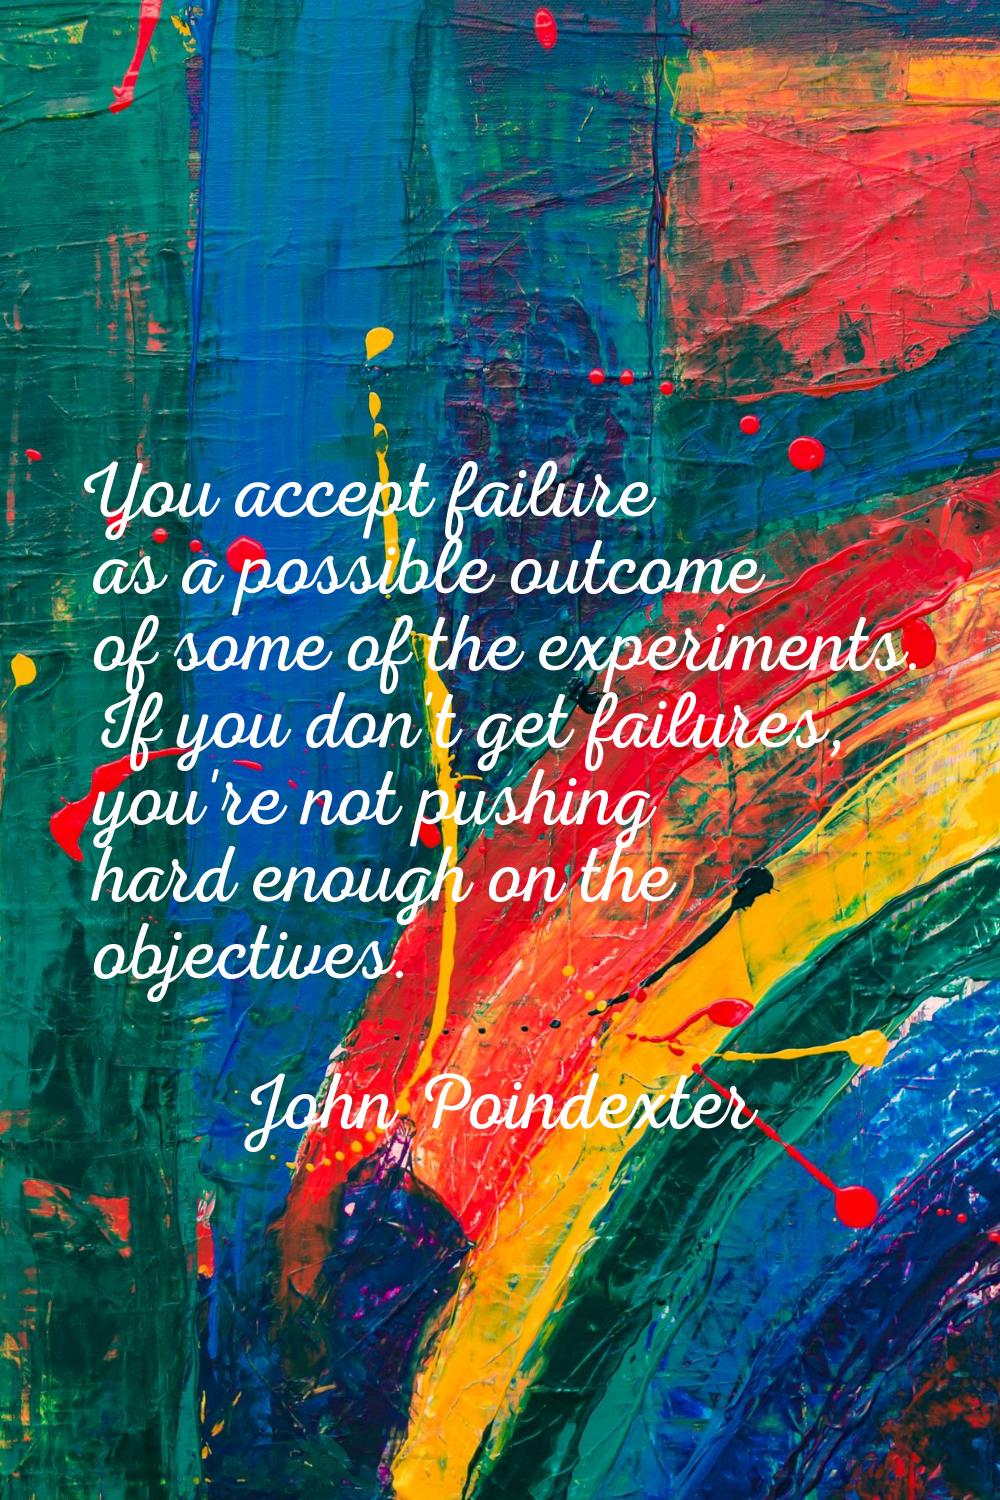 You accept failure as a possible outcome of some of the experiments. If you don't get failures, you